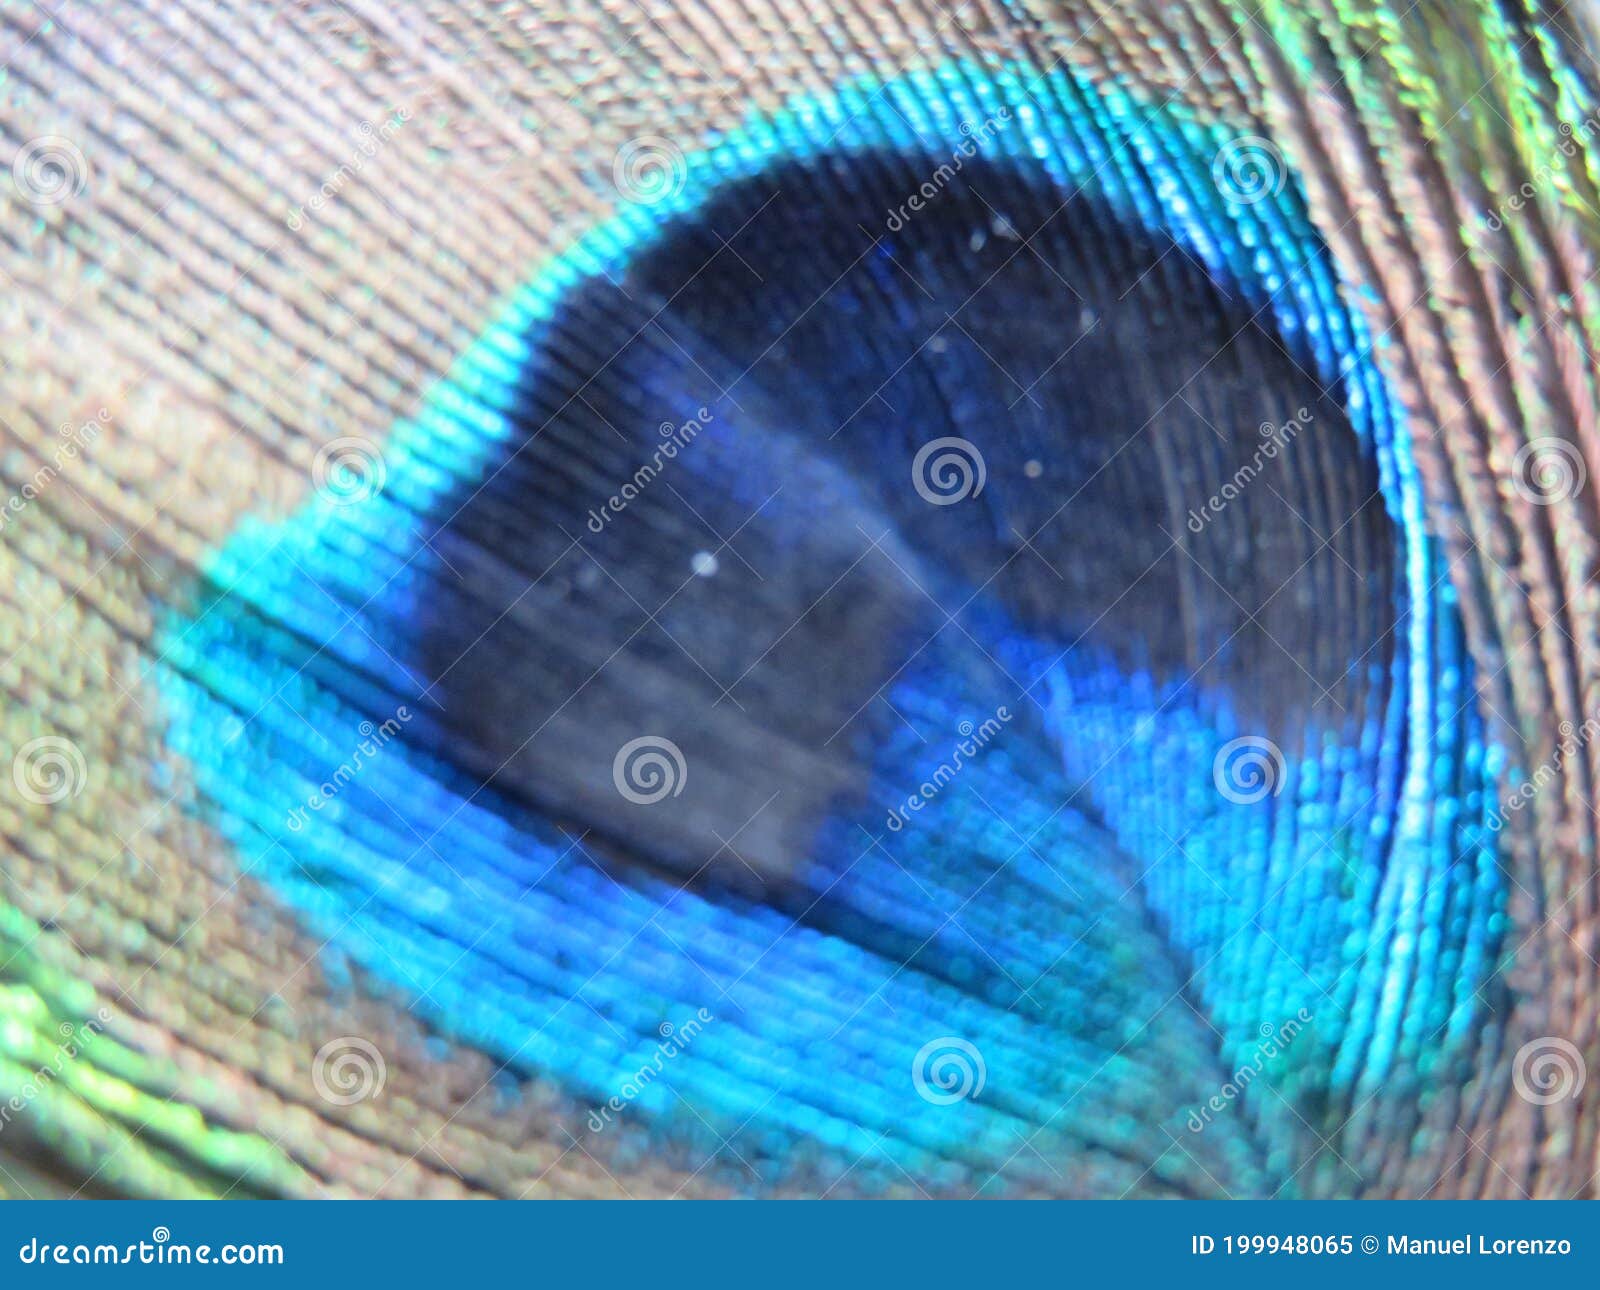 beautiful peacock feather with lots of colorful blue